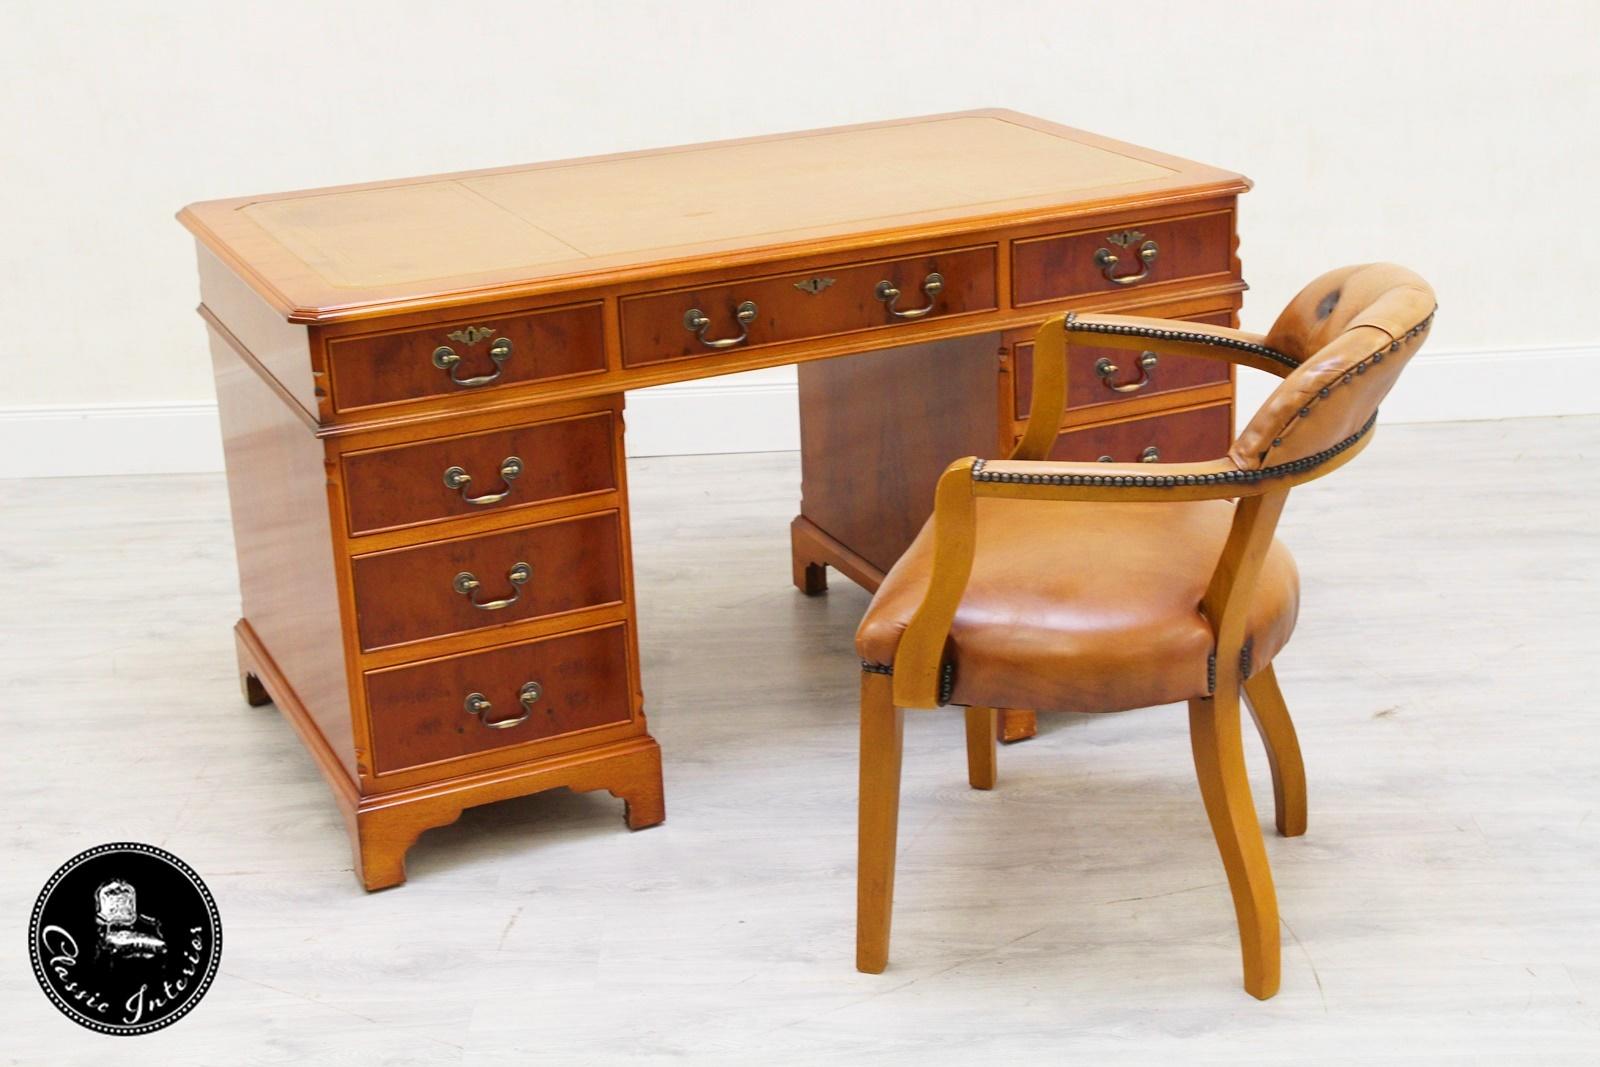 Desk with chair
From the period of 1980-1990

Condition: The table is in an age appropriate condition and still has the charm of the 